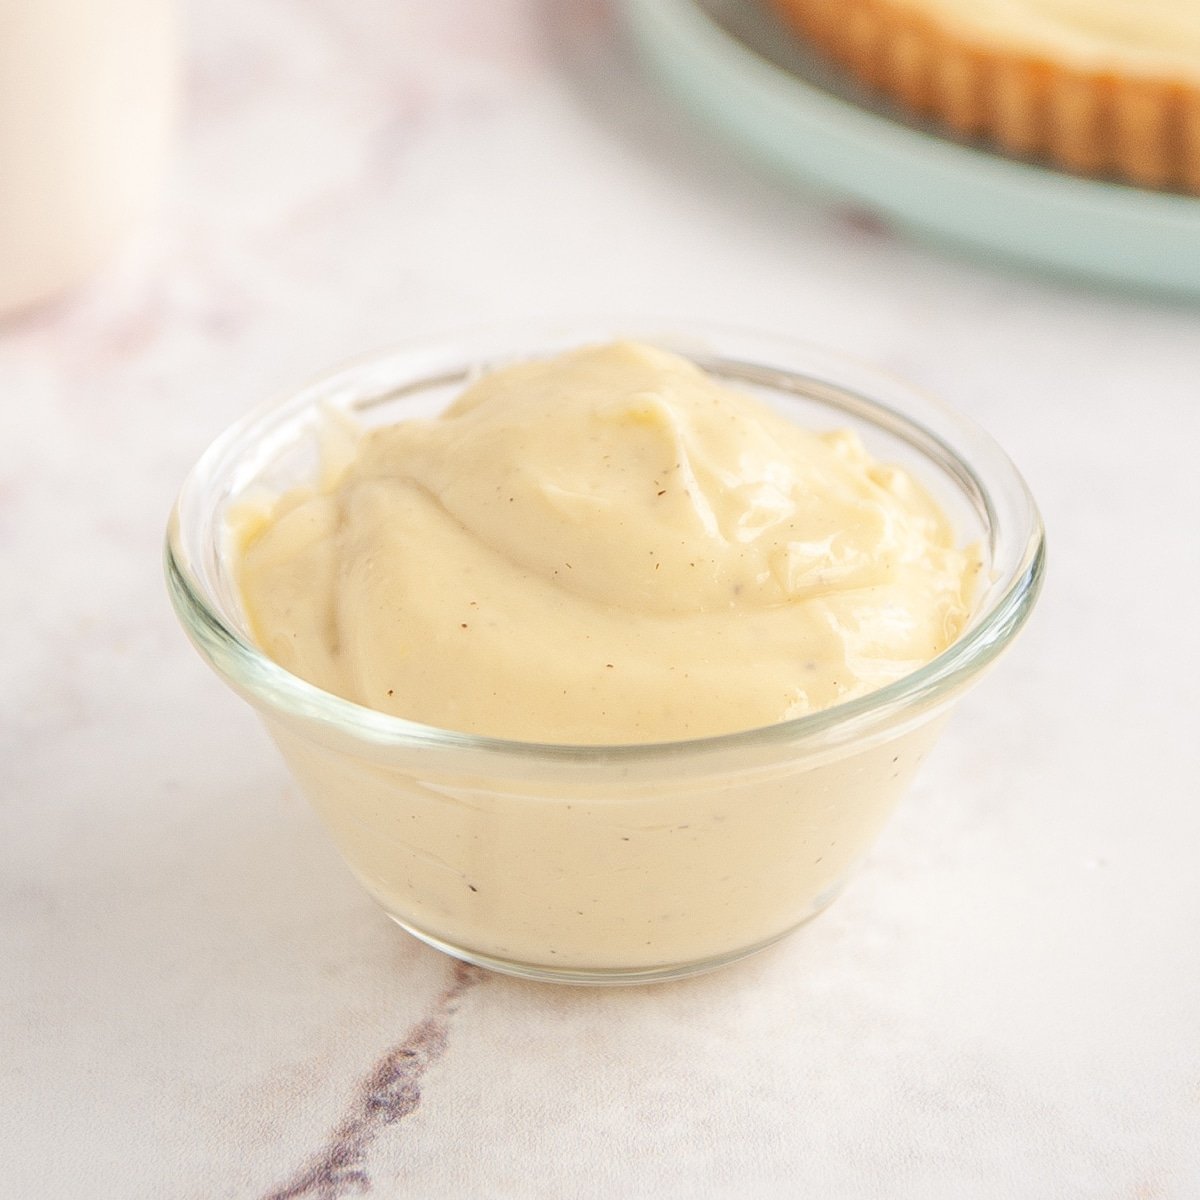 pastry cream in clear glass bowl on white background